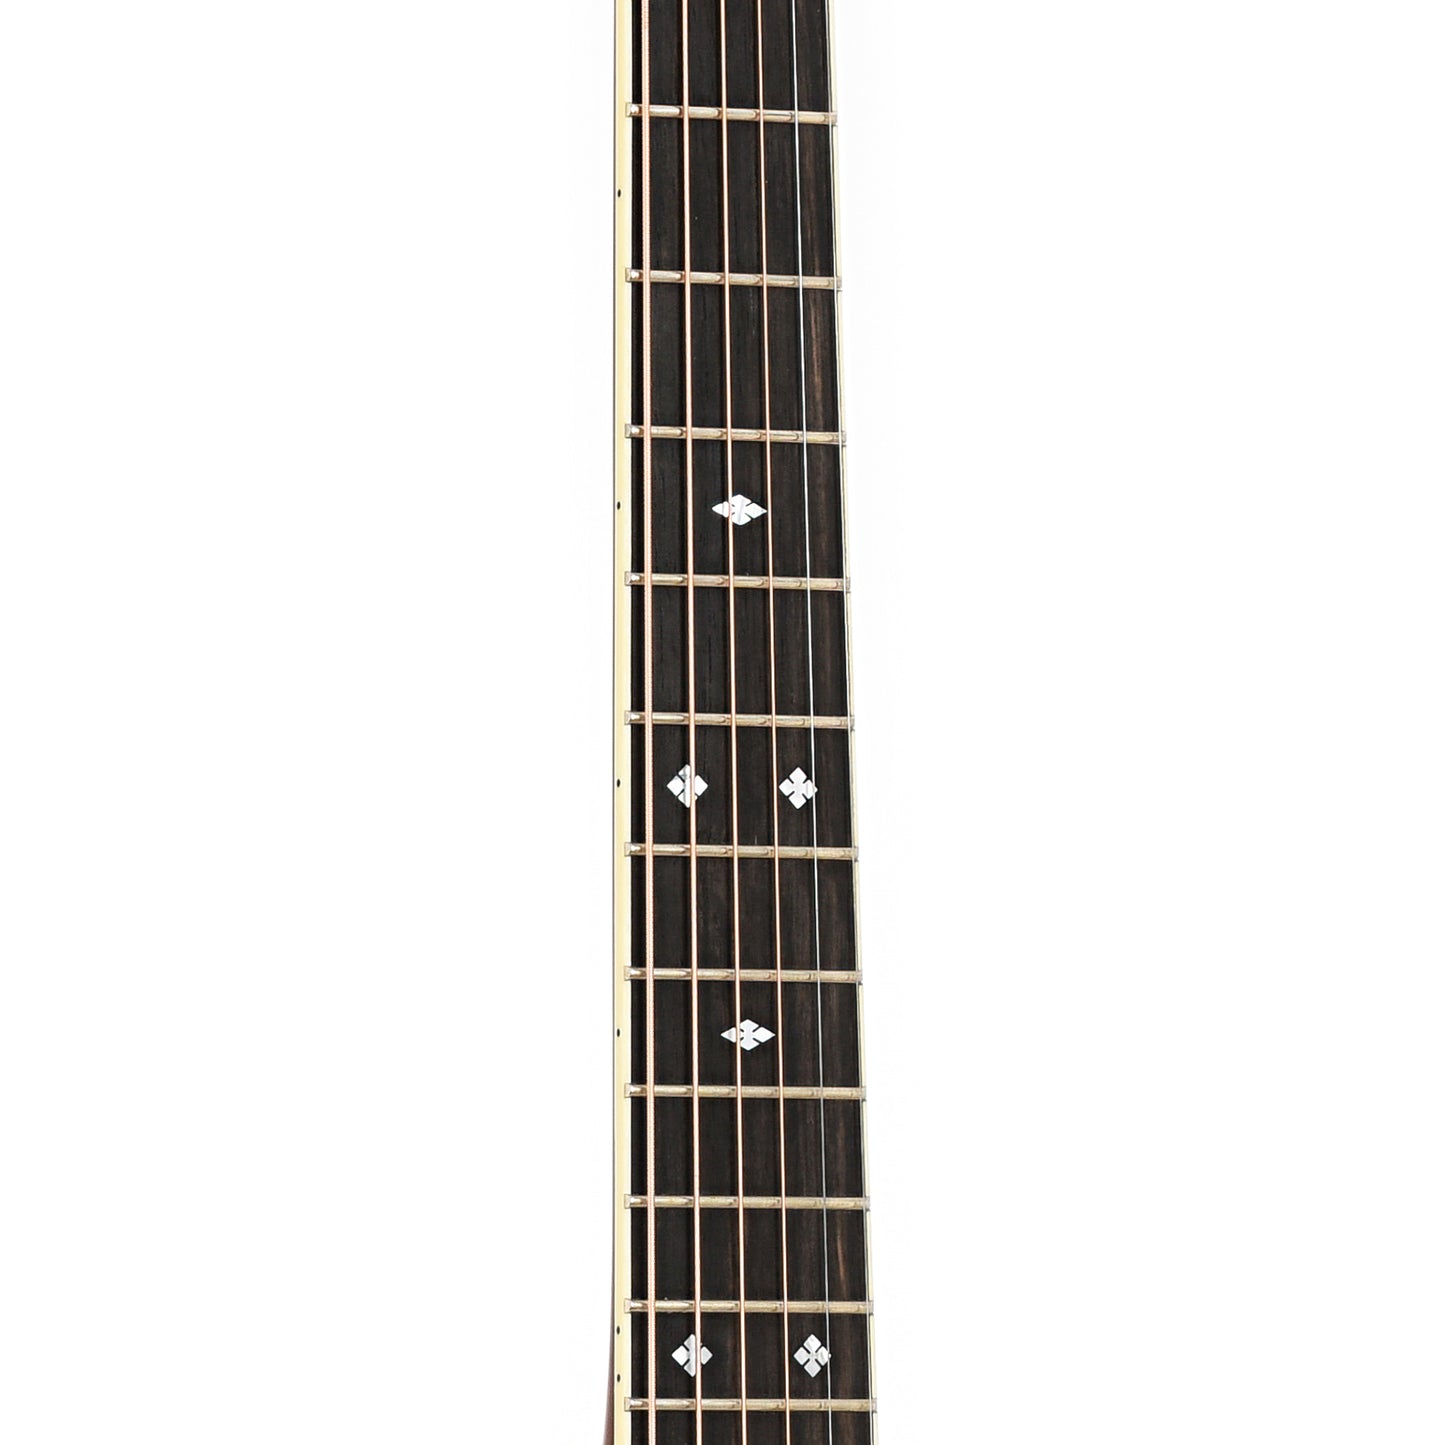 Fretboard of Gallagher Guitar Co. Jumbo 70 Acoustic